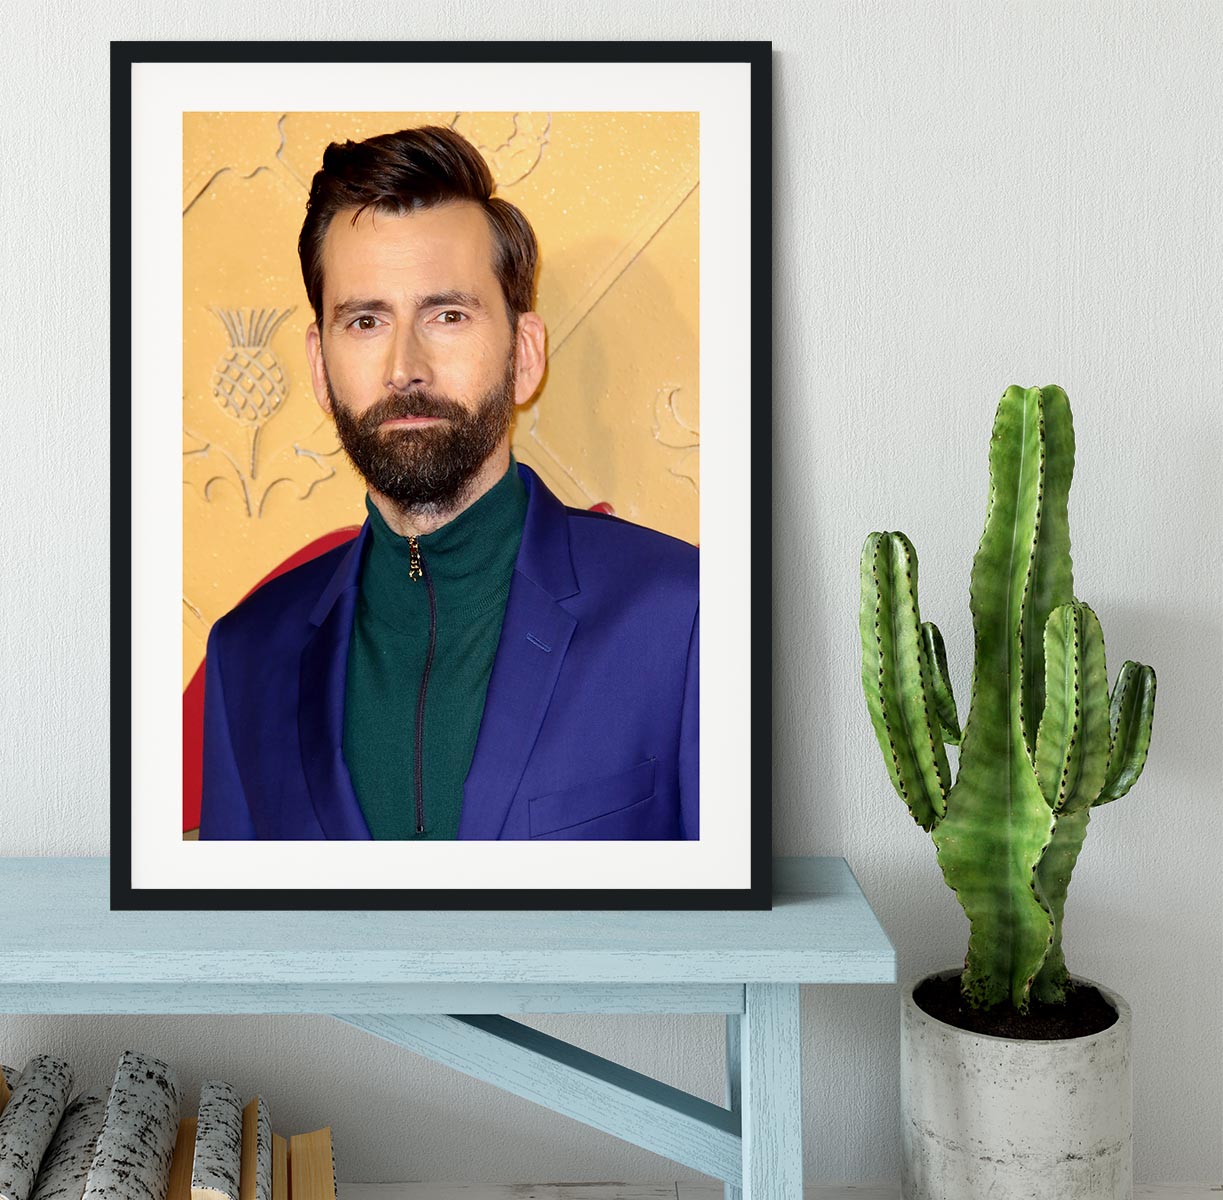 David Tennant at Mary Queen of Scots premiere Framed Print - Canvas Art Rocks - 1